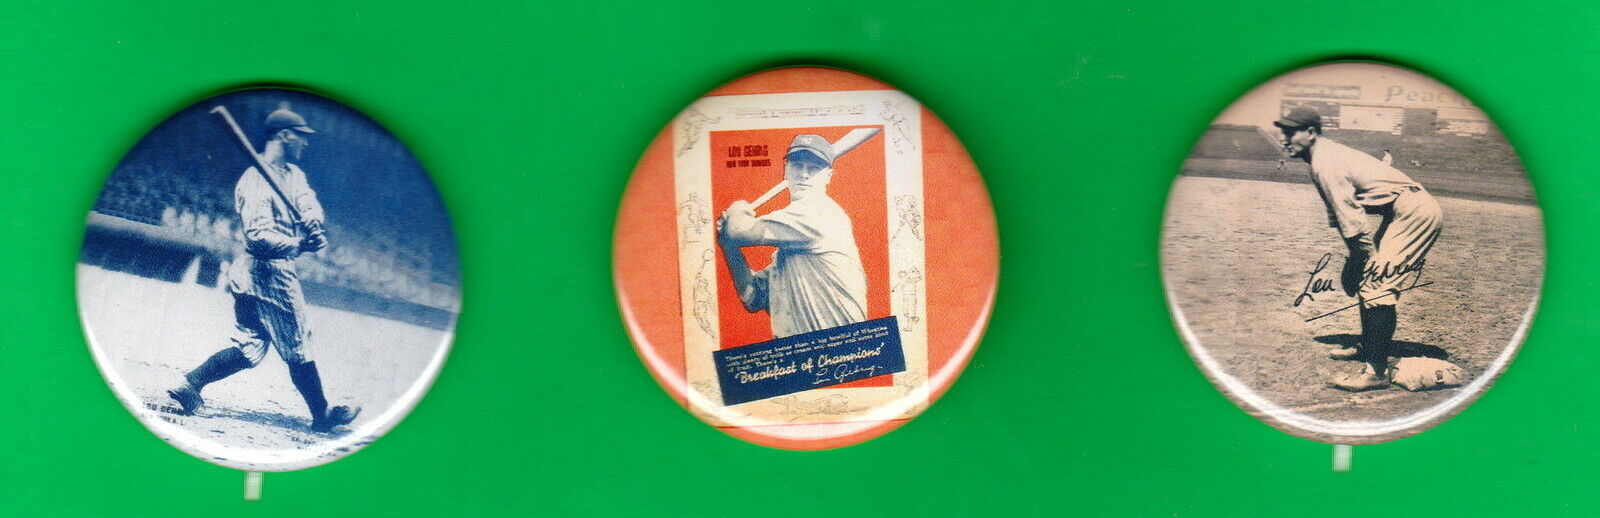 Lou GEHRIG 1920-1936 STYLE (3) RP *PINS* Exhibits Wheaties Butterfinger